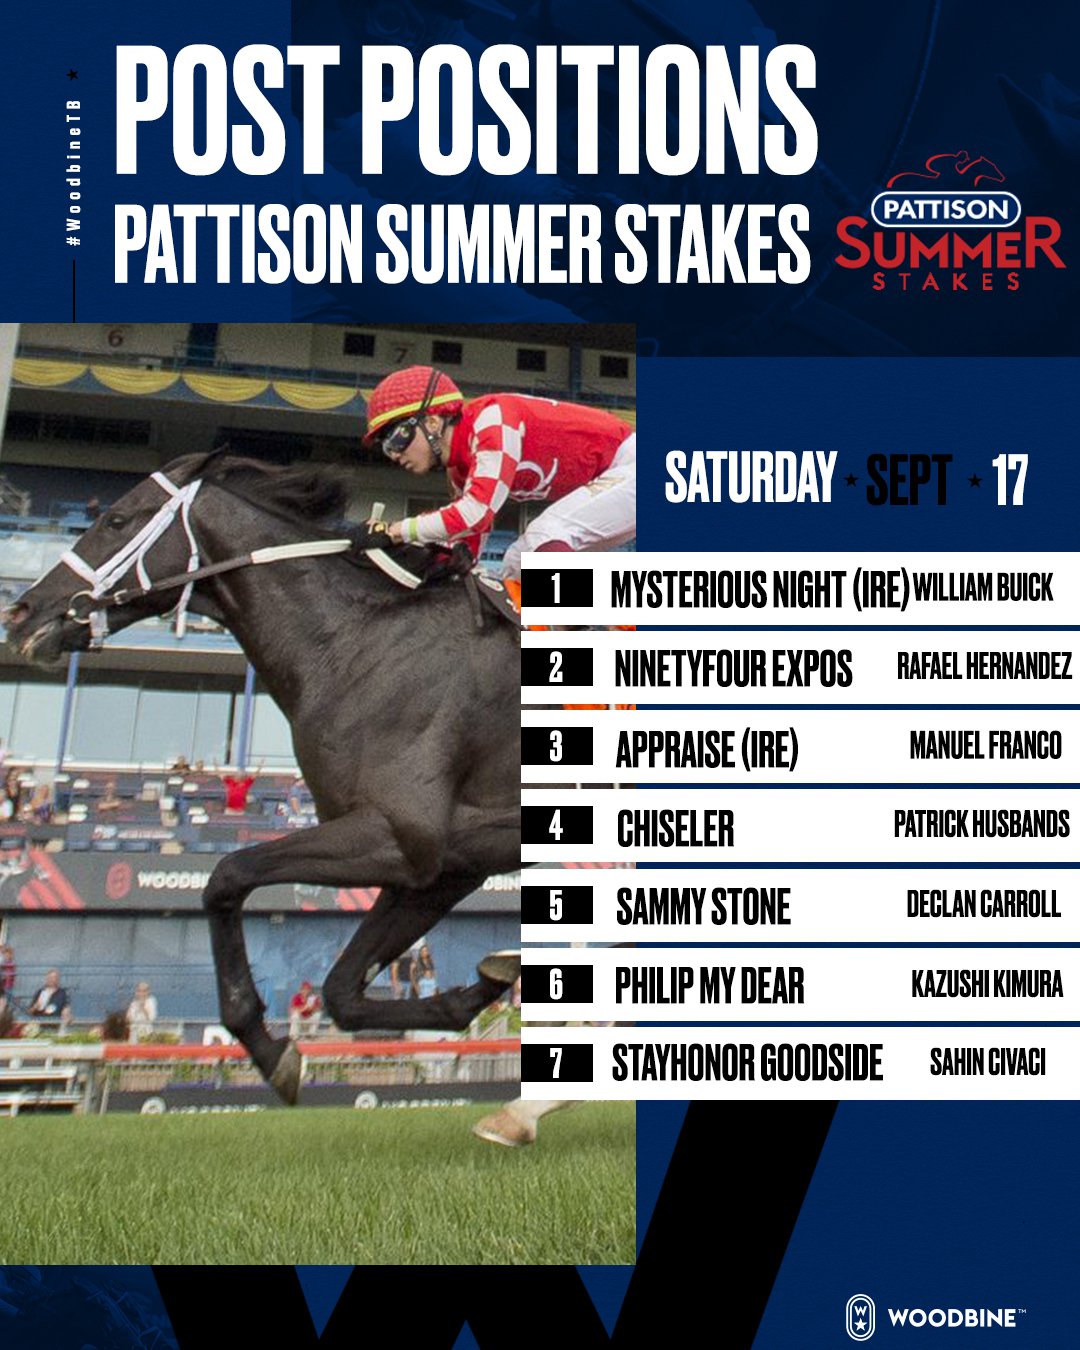 Pattison Summer Stakes Post Positions